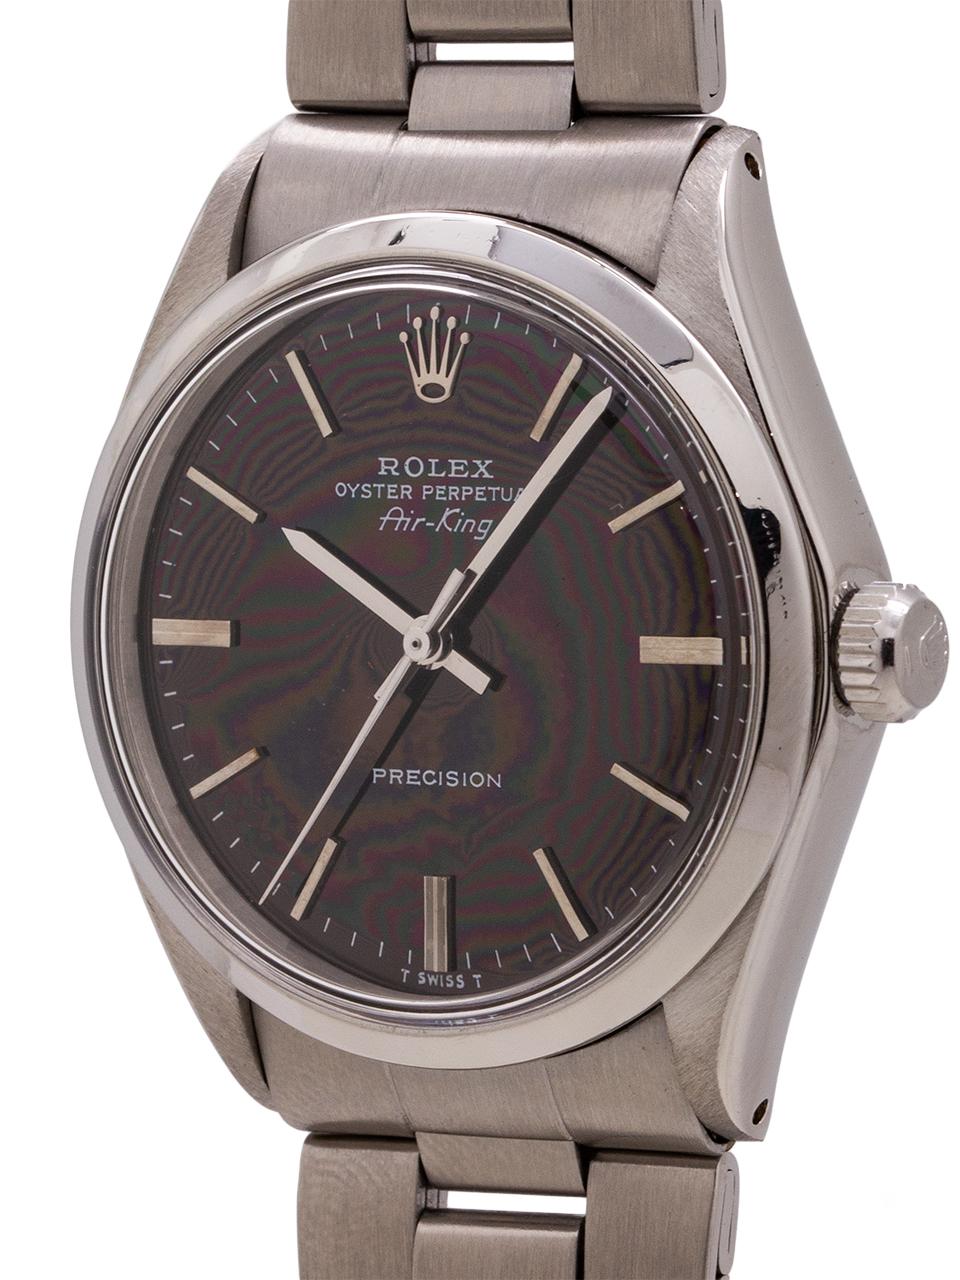 
Rolex Oyster Perpetual Airking ref 5500 stainless steel serial # 3.2 million circa 1972. 34mm diameter case with smooth bezel and acrylic crystal. Gloss black original dial with applied silver indexes and silver baton hands. Powered by self winding